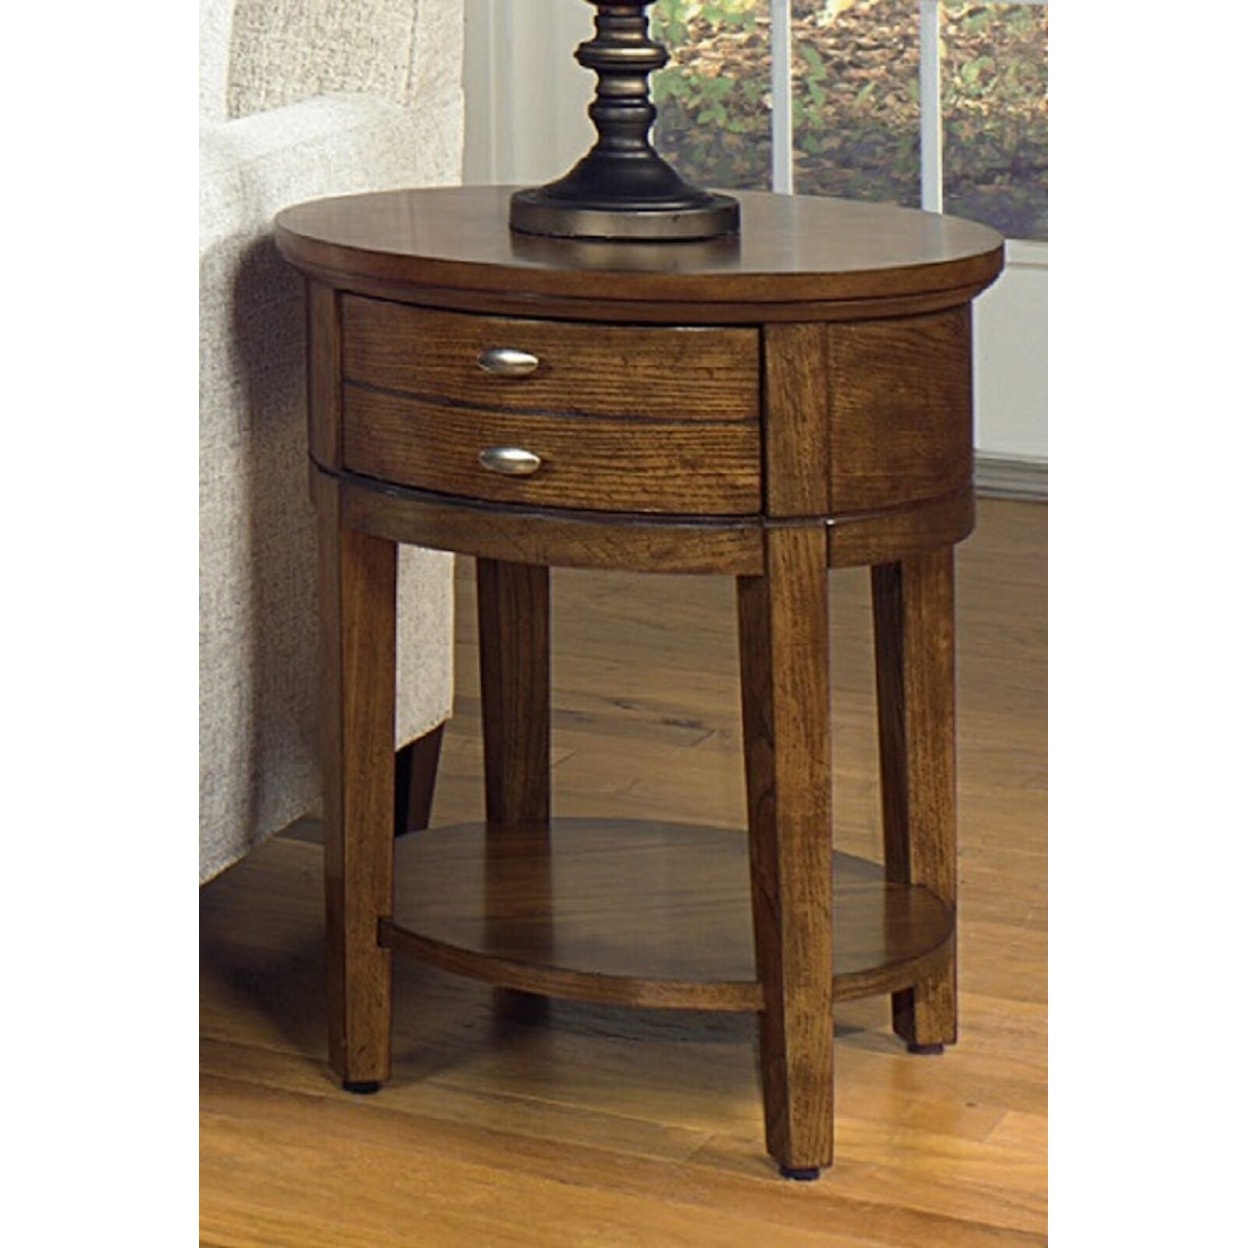 Null Furniture 2016 - Newport End Table